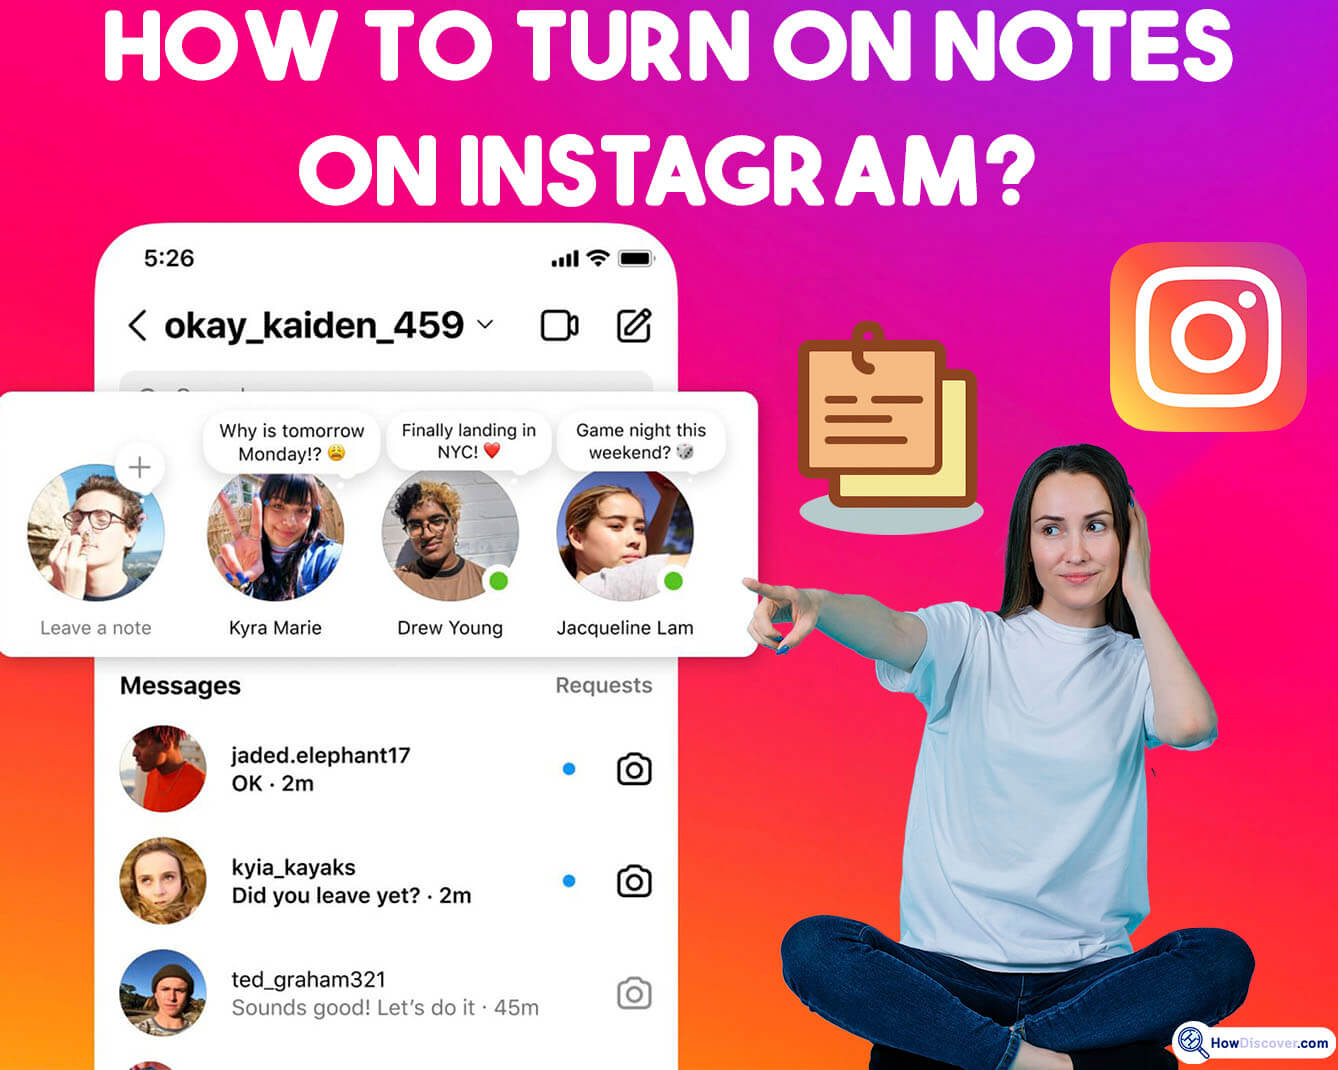 How to Turn On Notes on Instagram